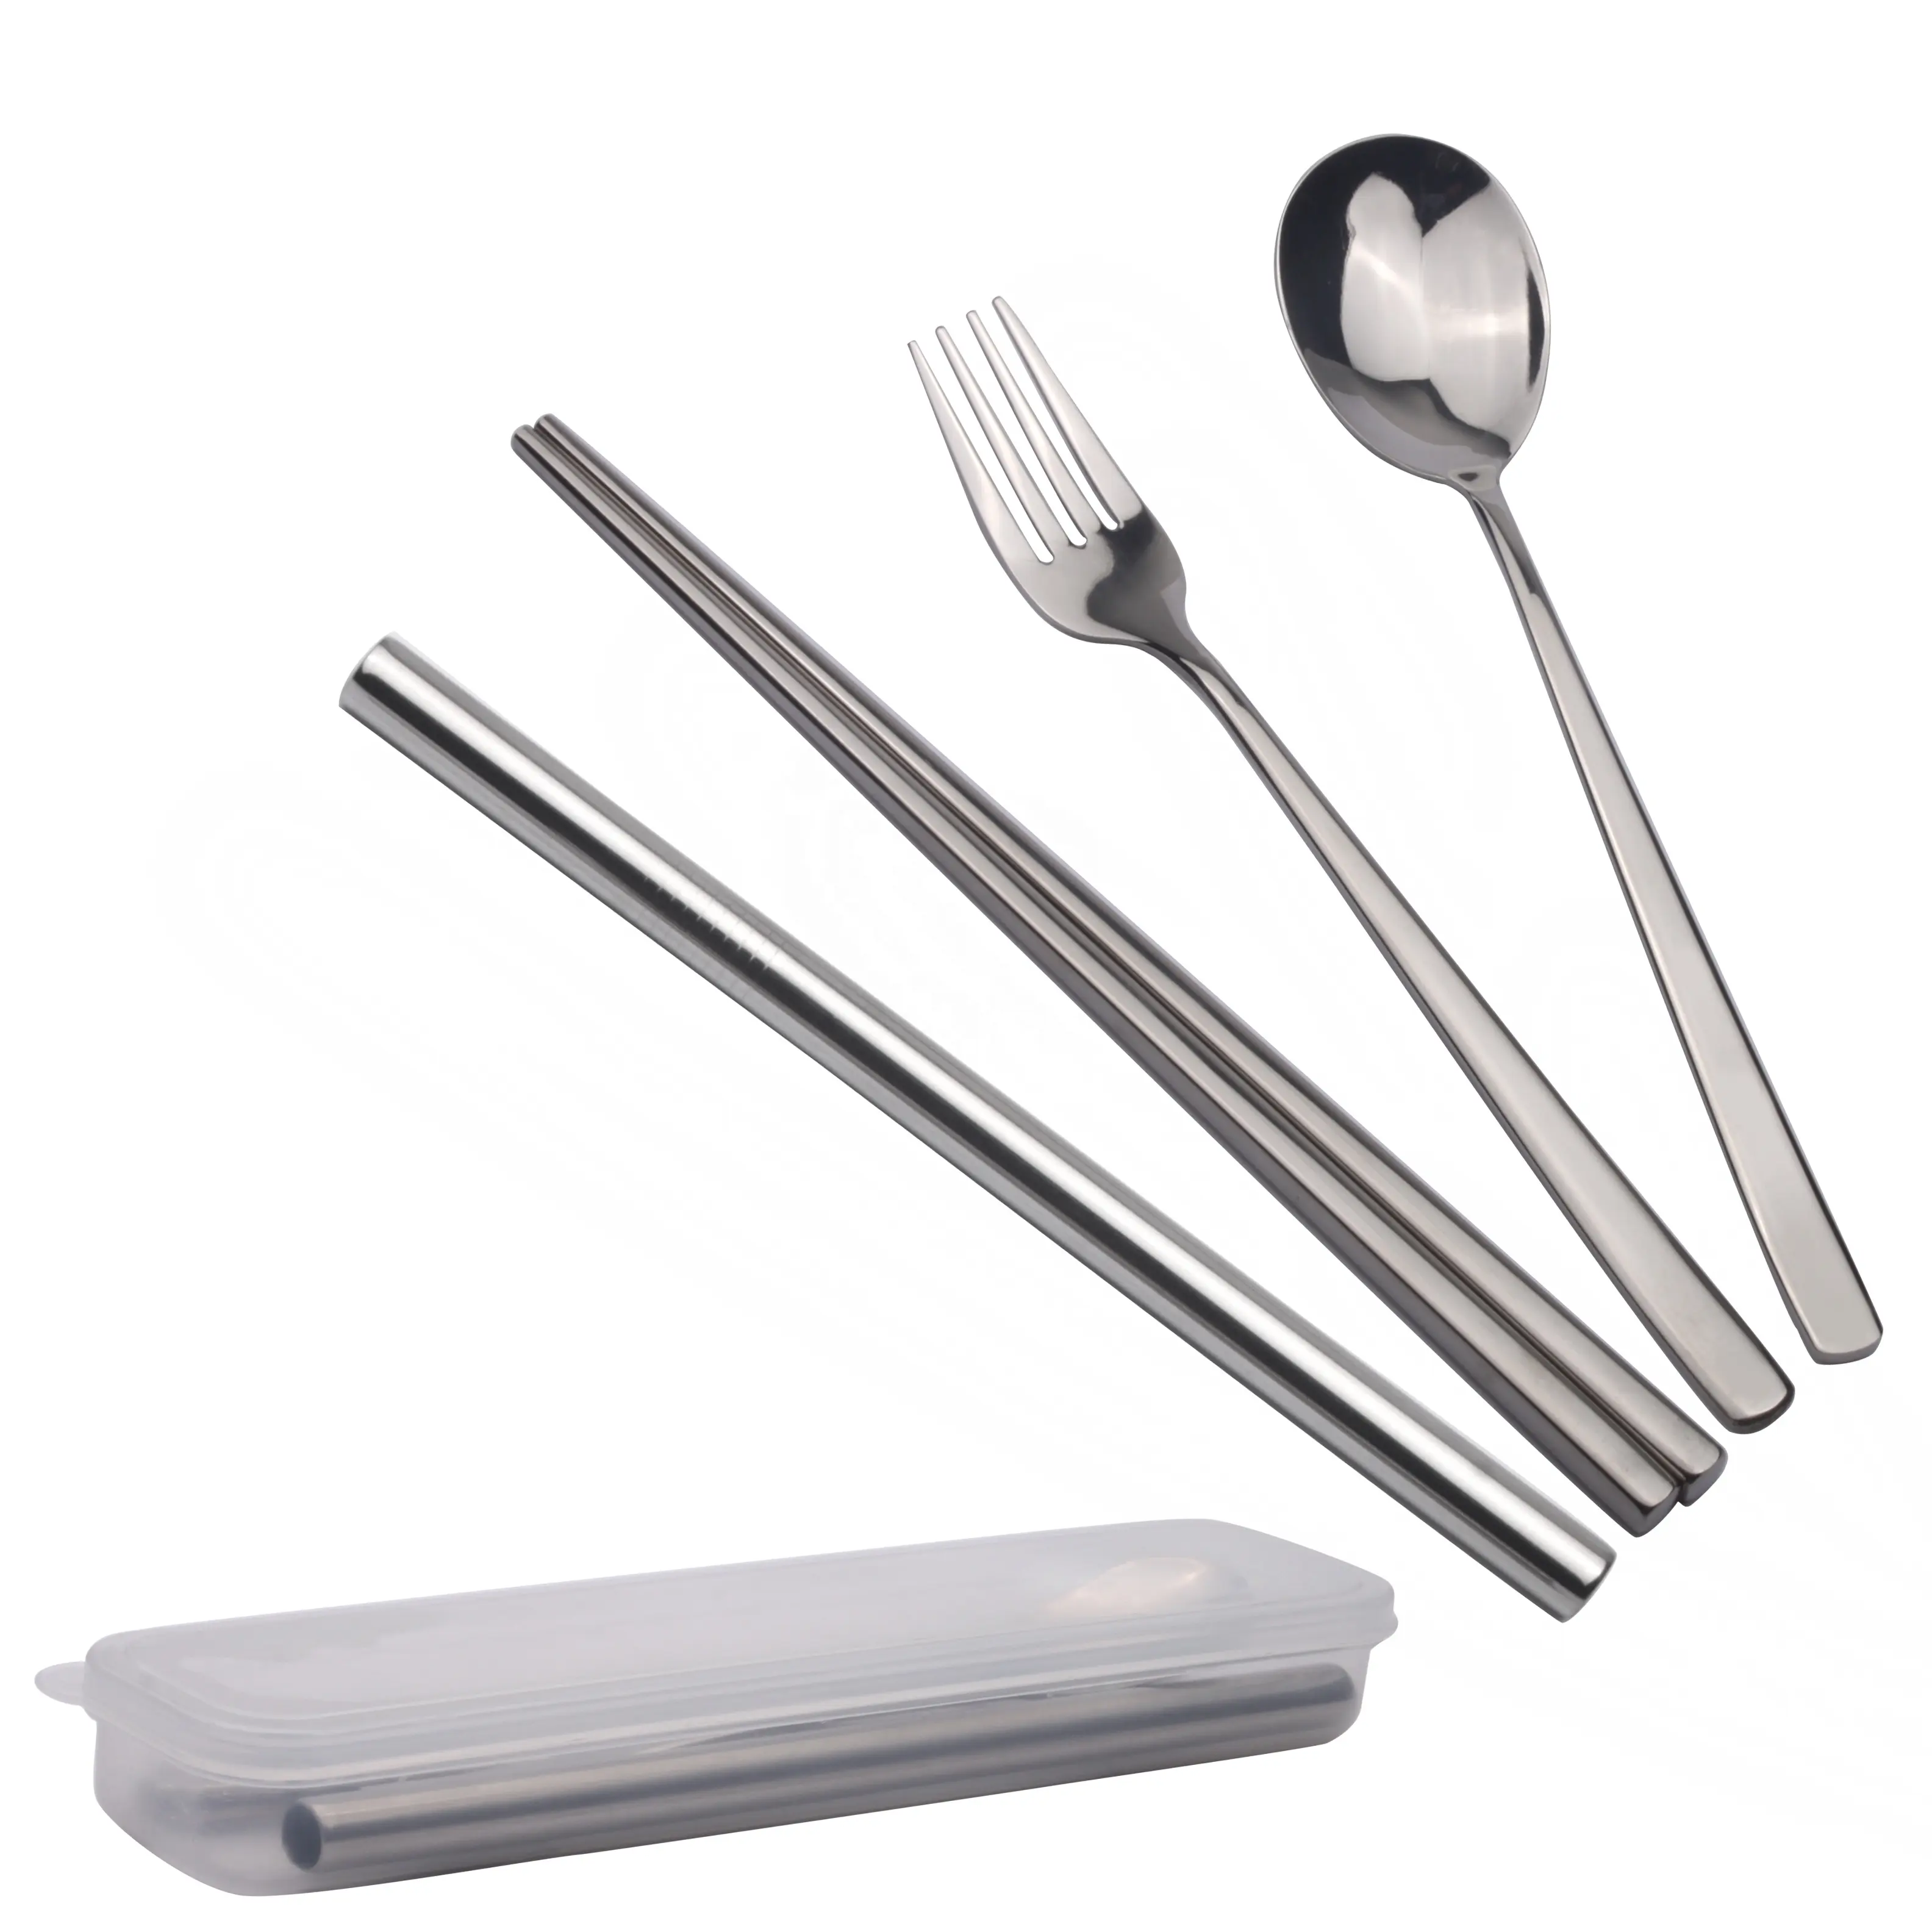 OEM Factory travel camping portable stainless steel silverware flatware cutlery sets wholesale